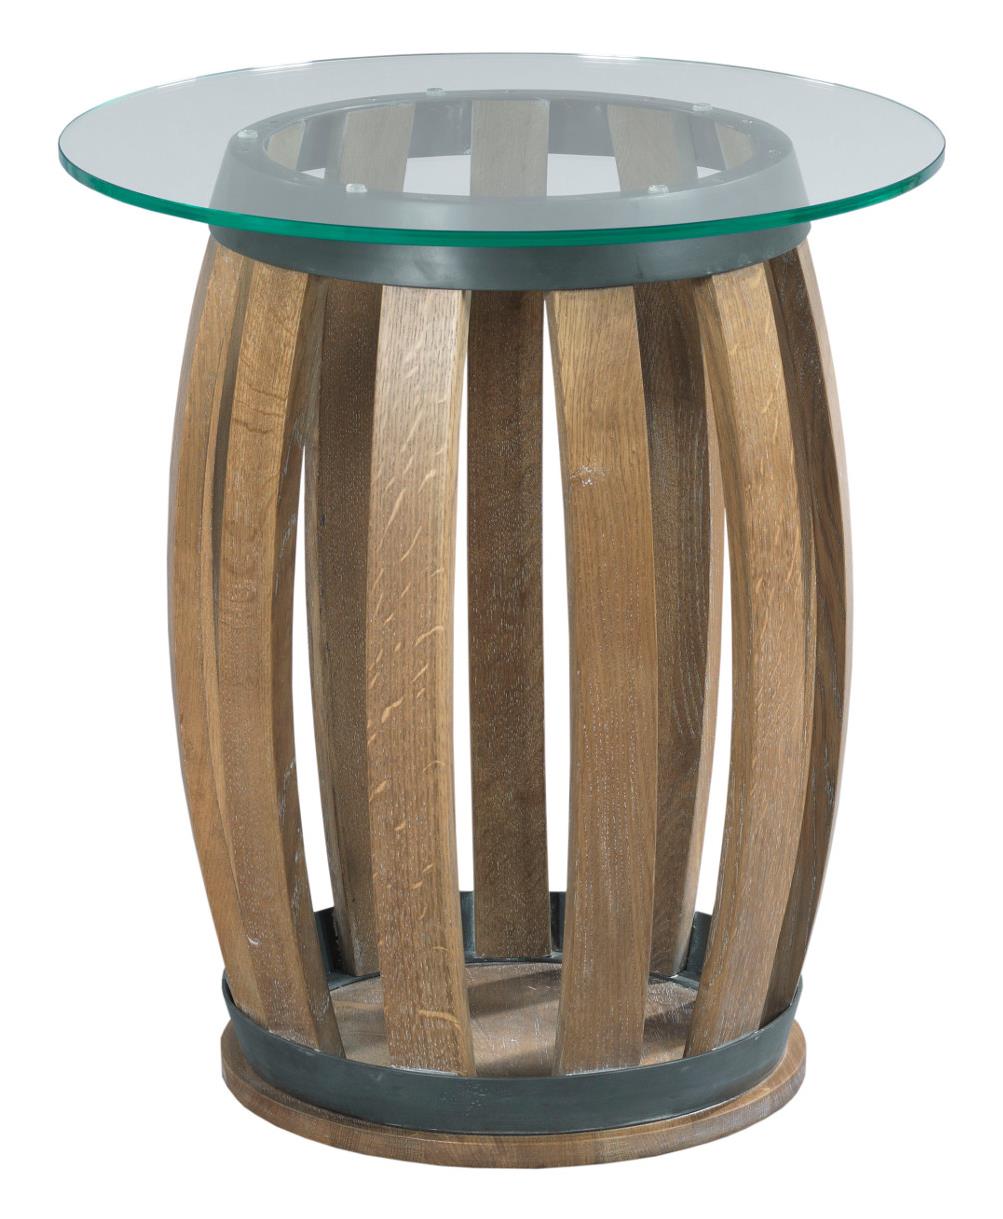 kincaid furniture stone ridge rustic wine barrel accent products color wood table round tiny corner sea themed lamp shades west elm modernist elegant placemats dining square